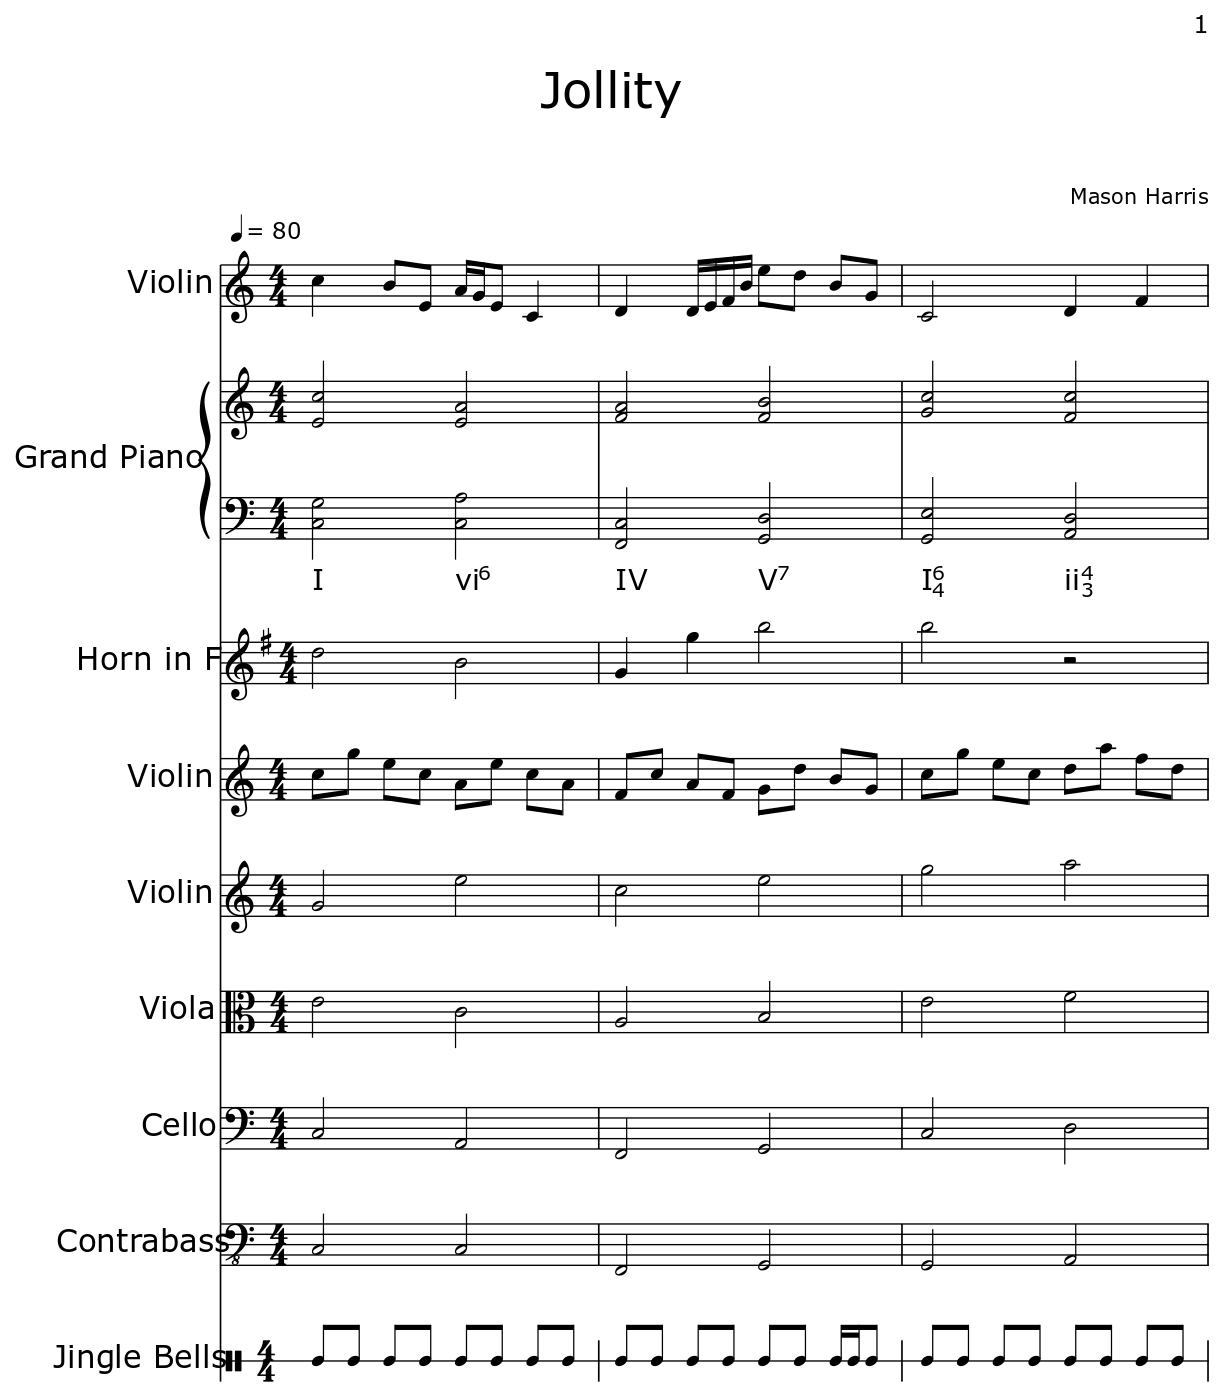 Jollity - Sheet music for Tubular Bells (Orchestral Chimes), Piano, Horn in F, Violin, Viola ...